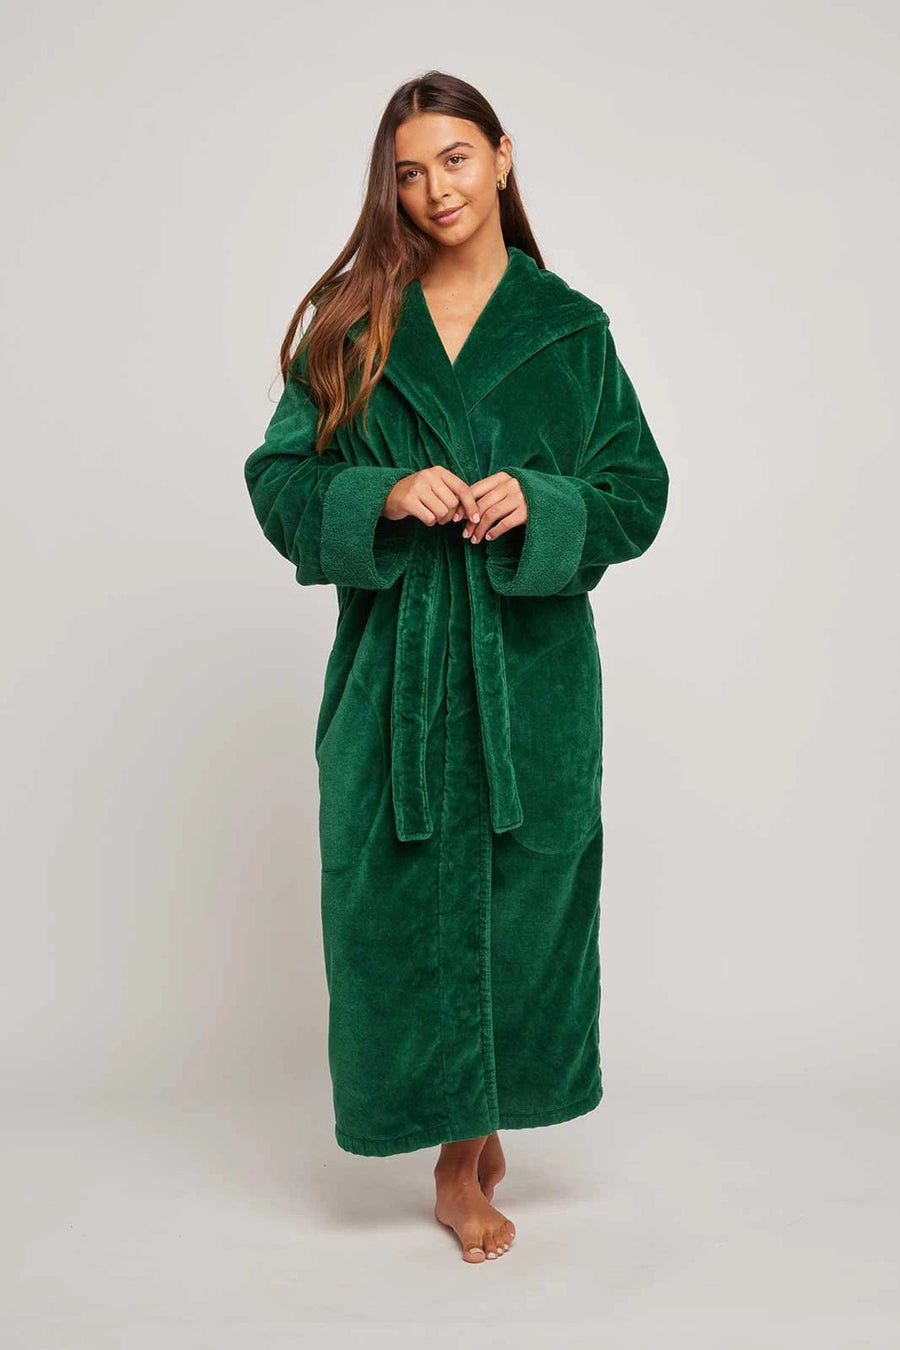 Green & Gold St James' Paisley Lined Cotton Dressing Gown | New & Lingwood